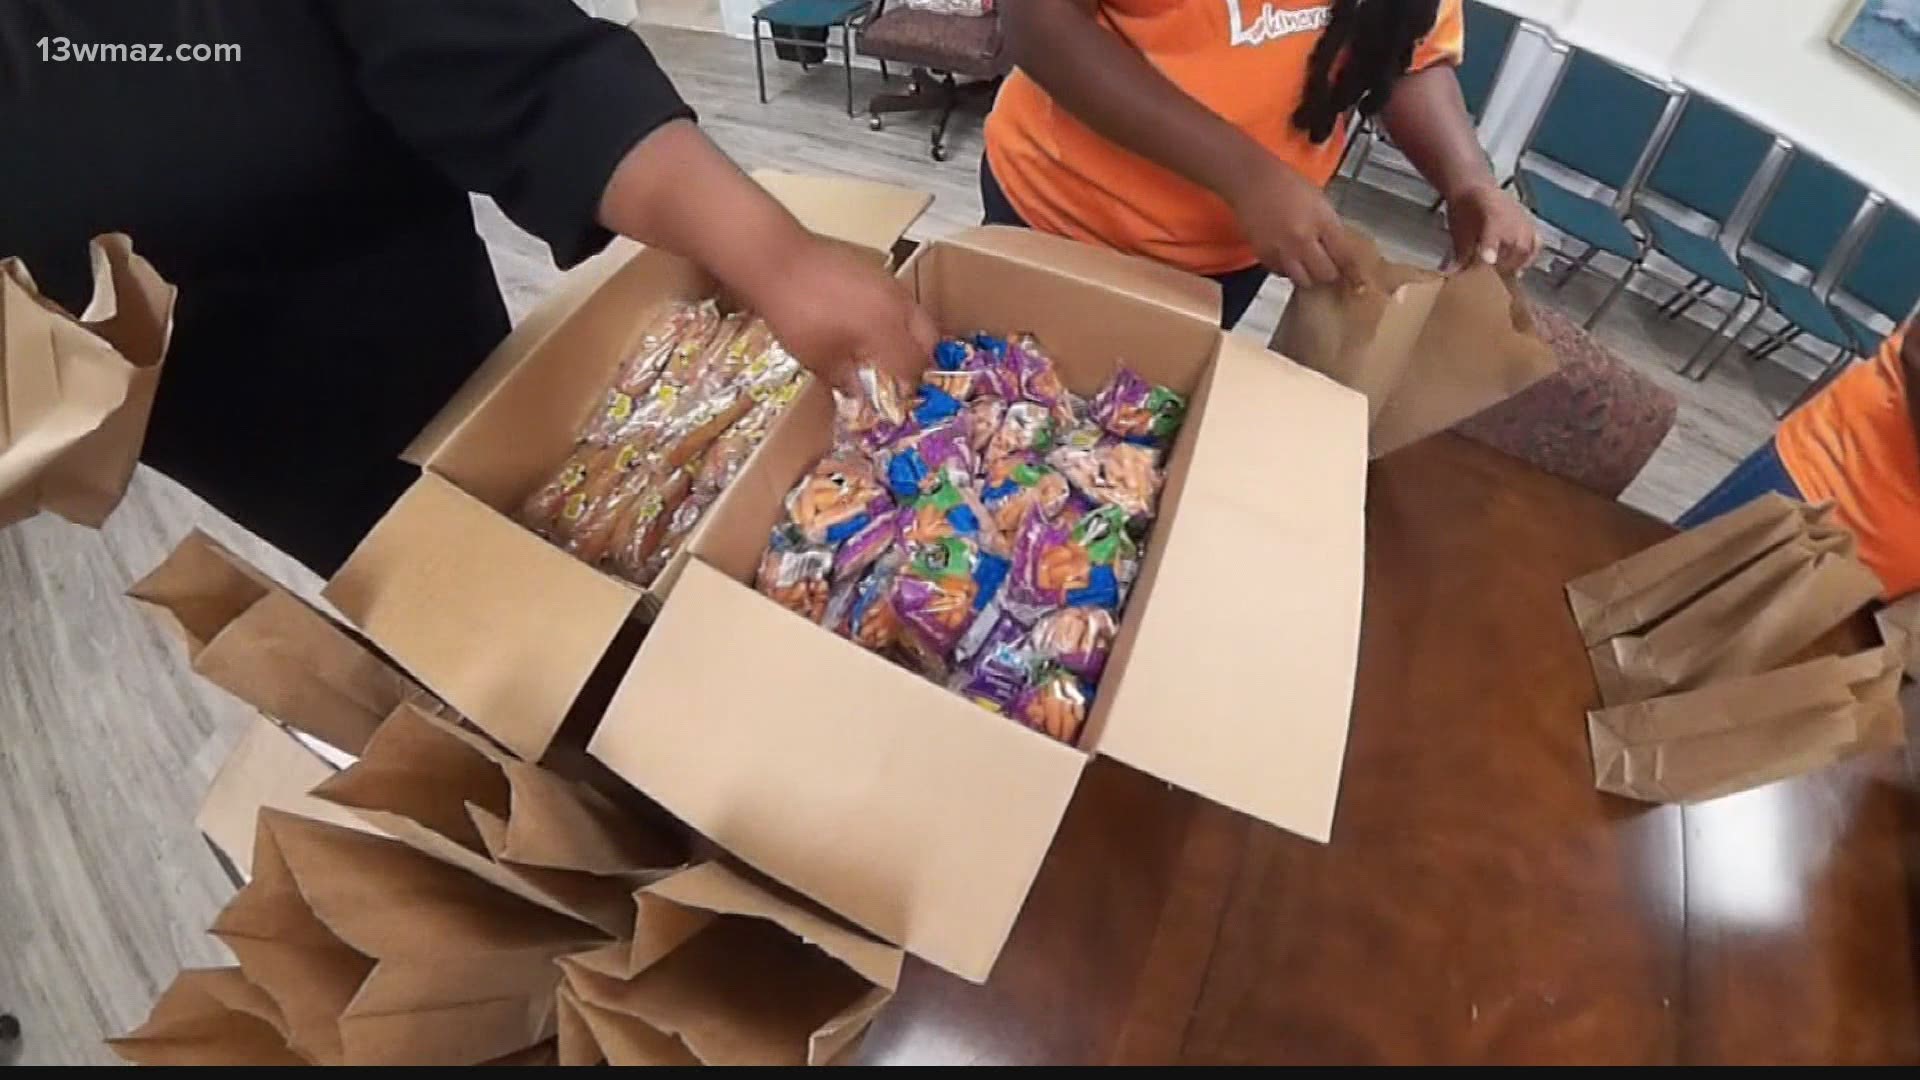 The Houston County School District says they’re seeing a large turnout for their free summer meals program.